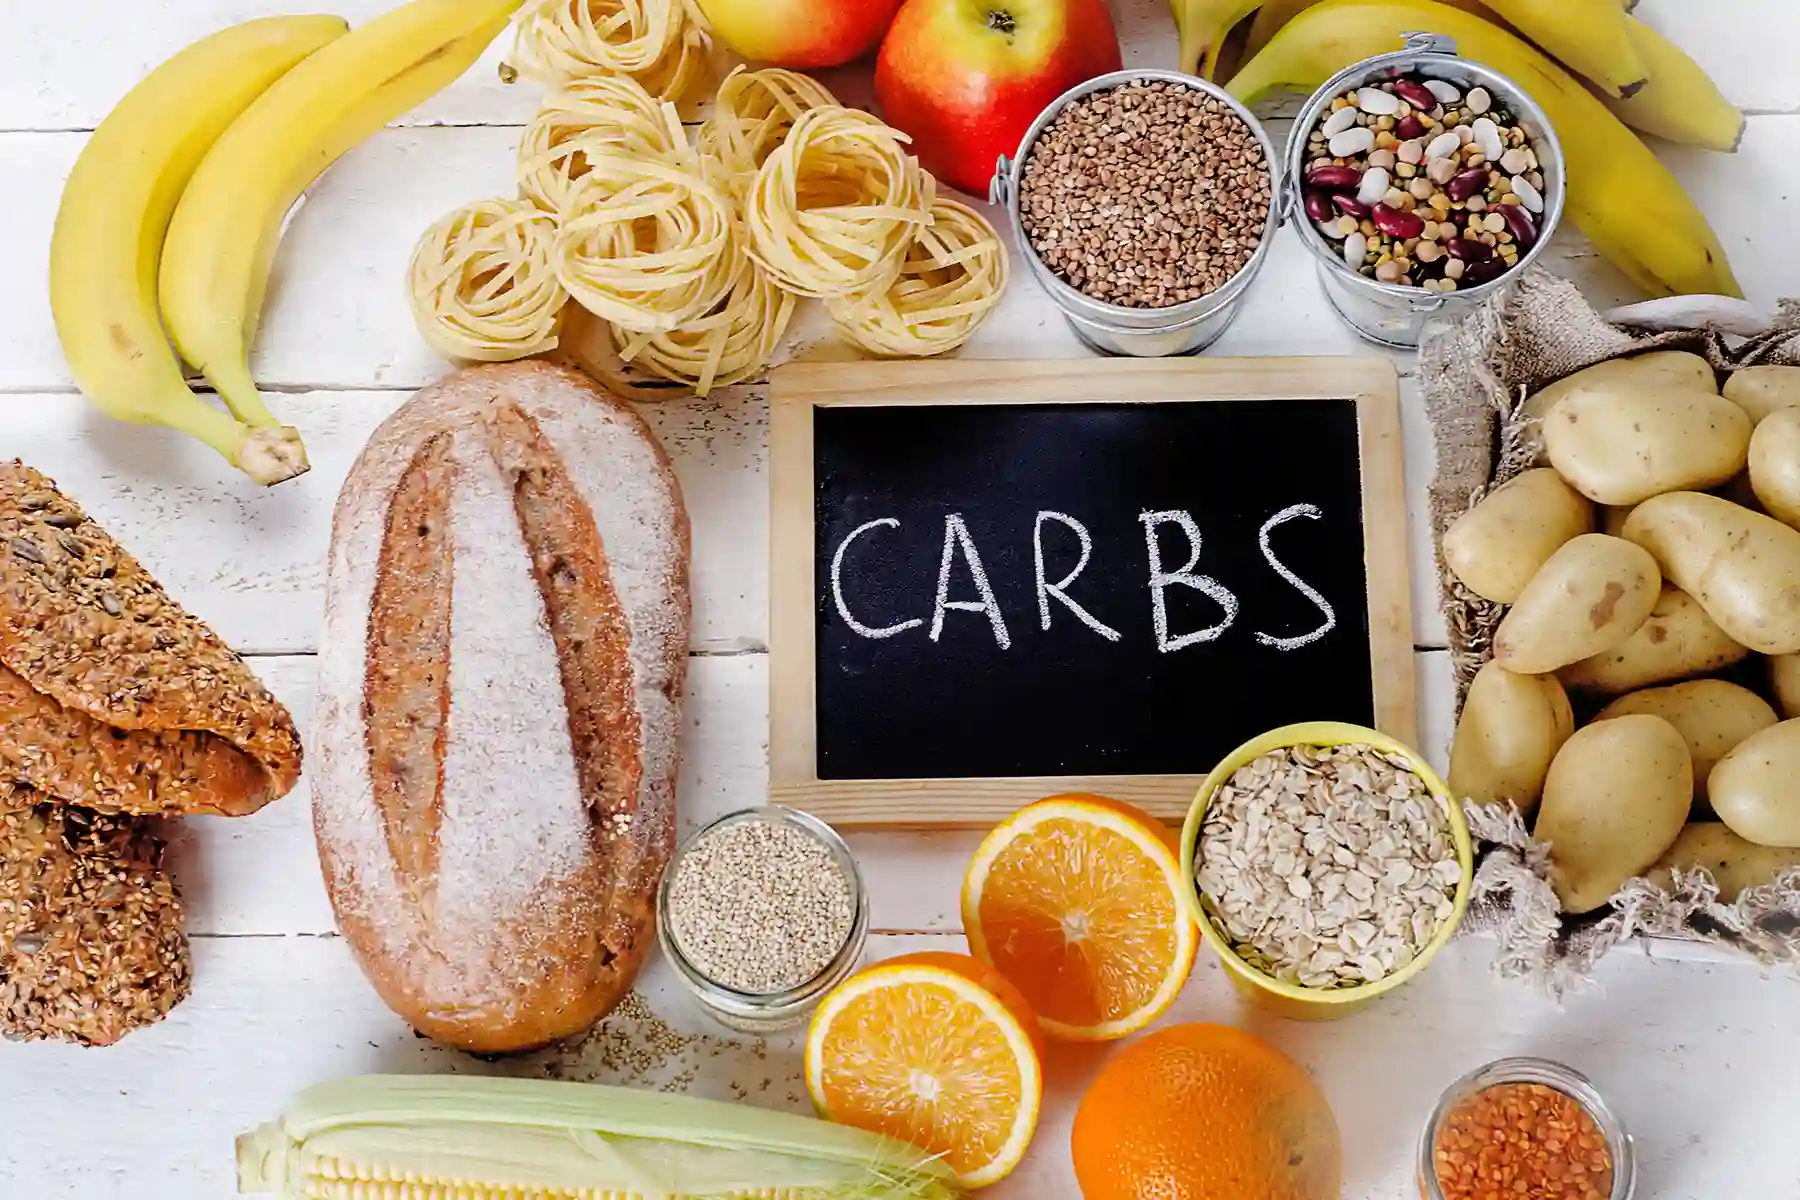 Foods with carbs